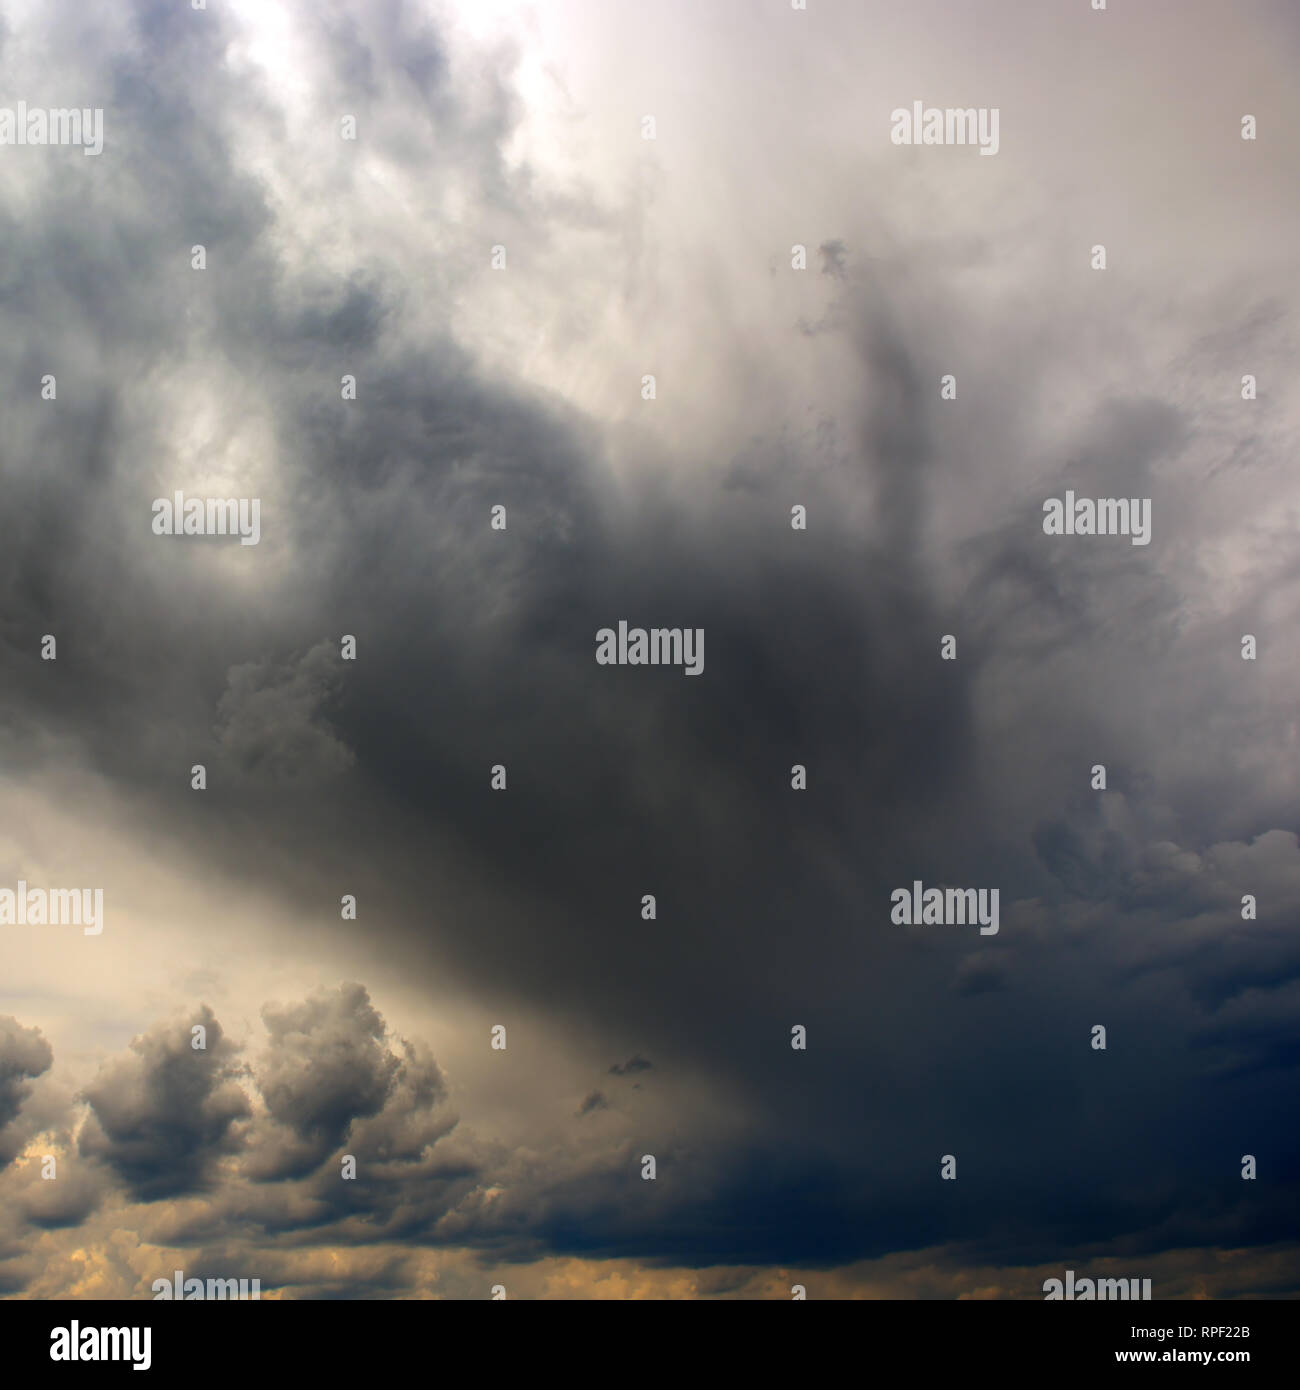 Heavy storm clouds cover the sun. Dramatic sky. Stock Photo